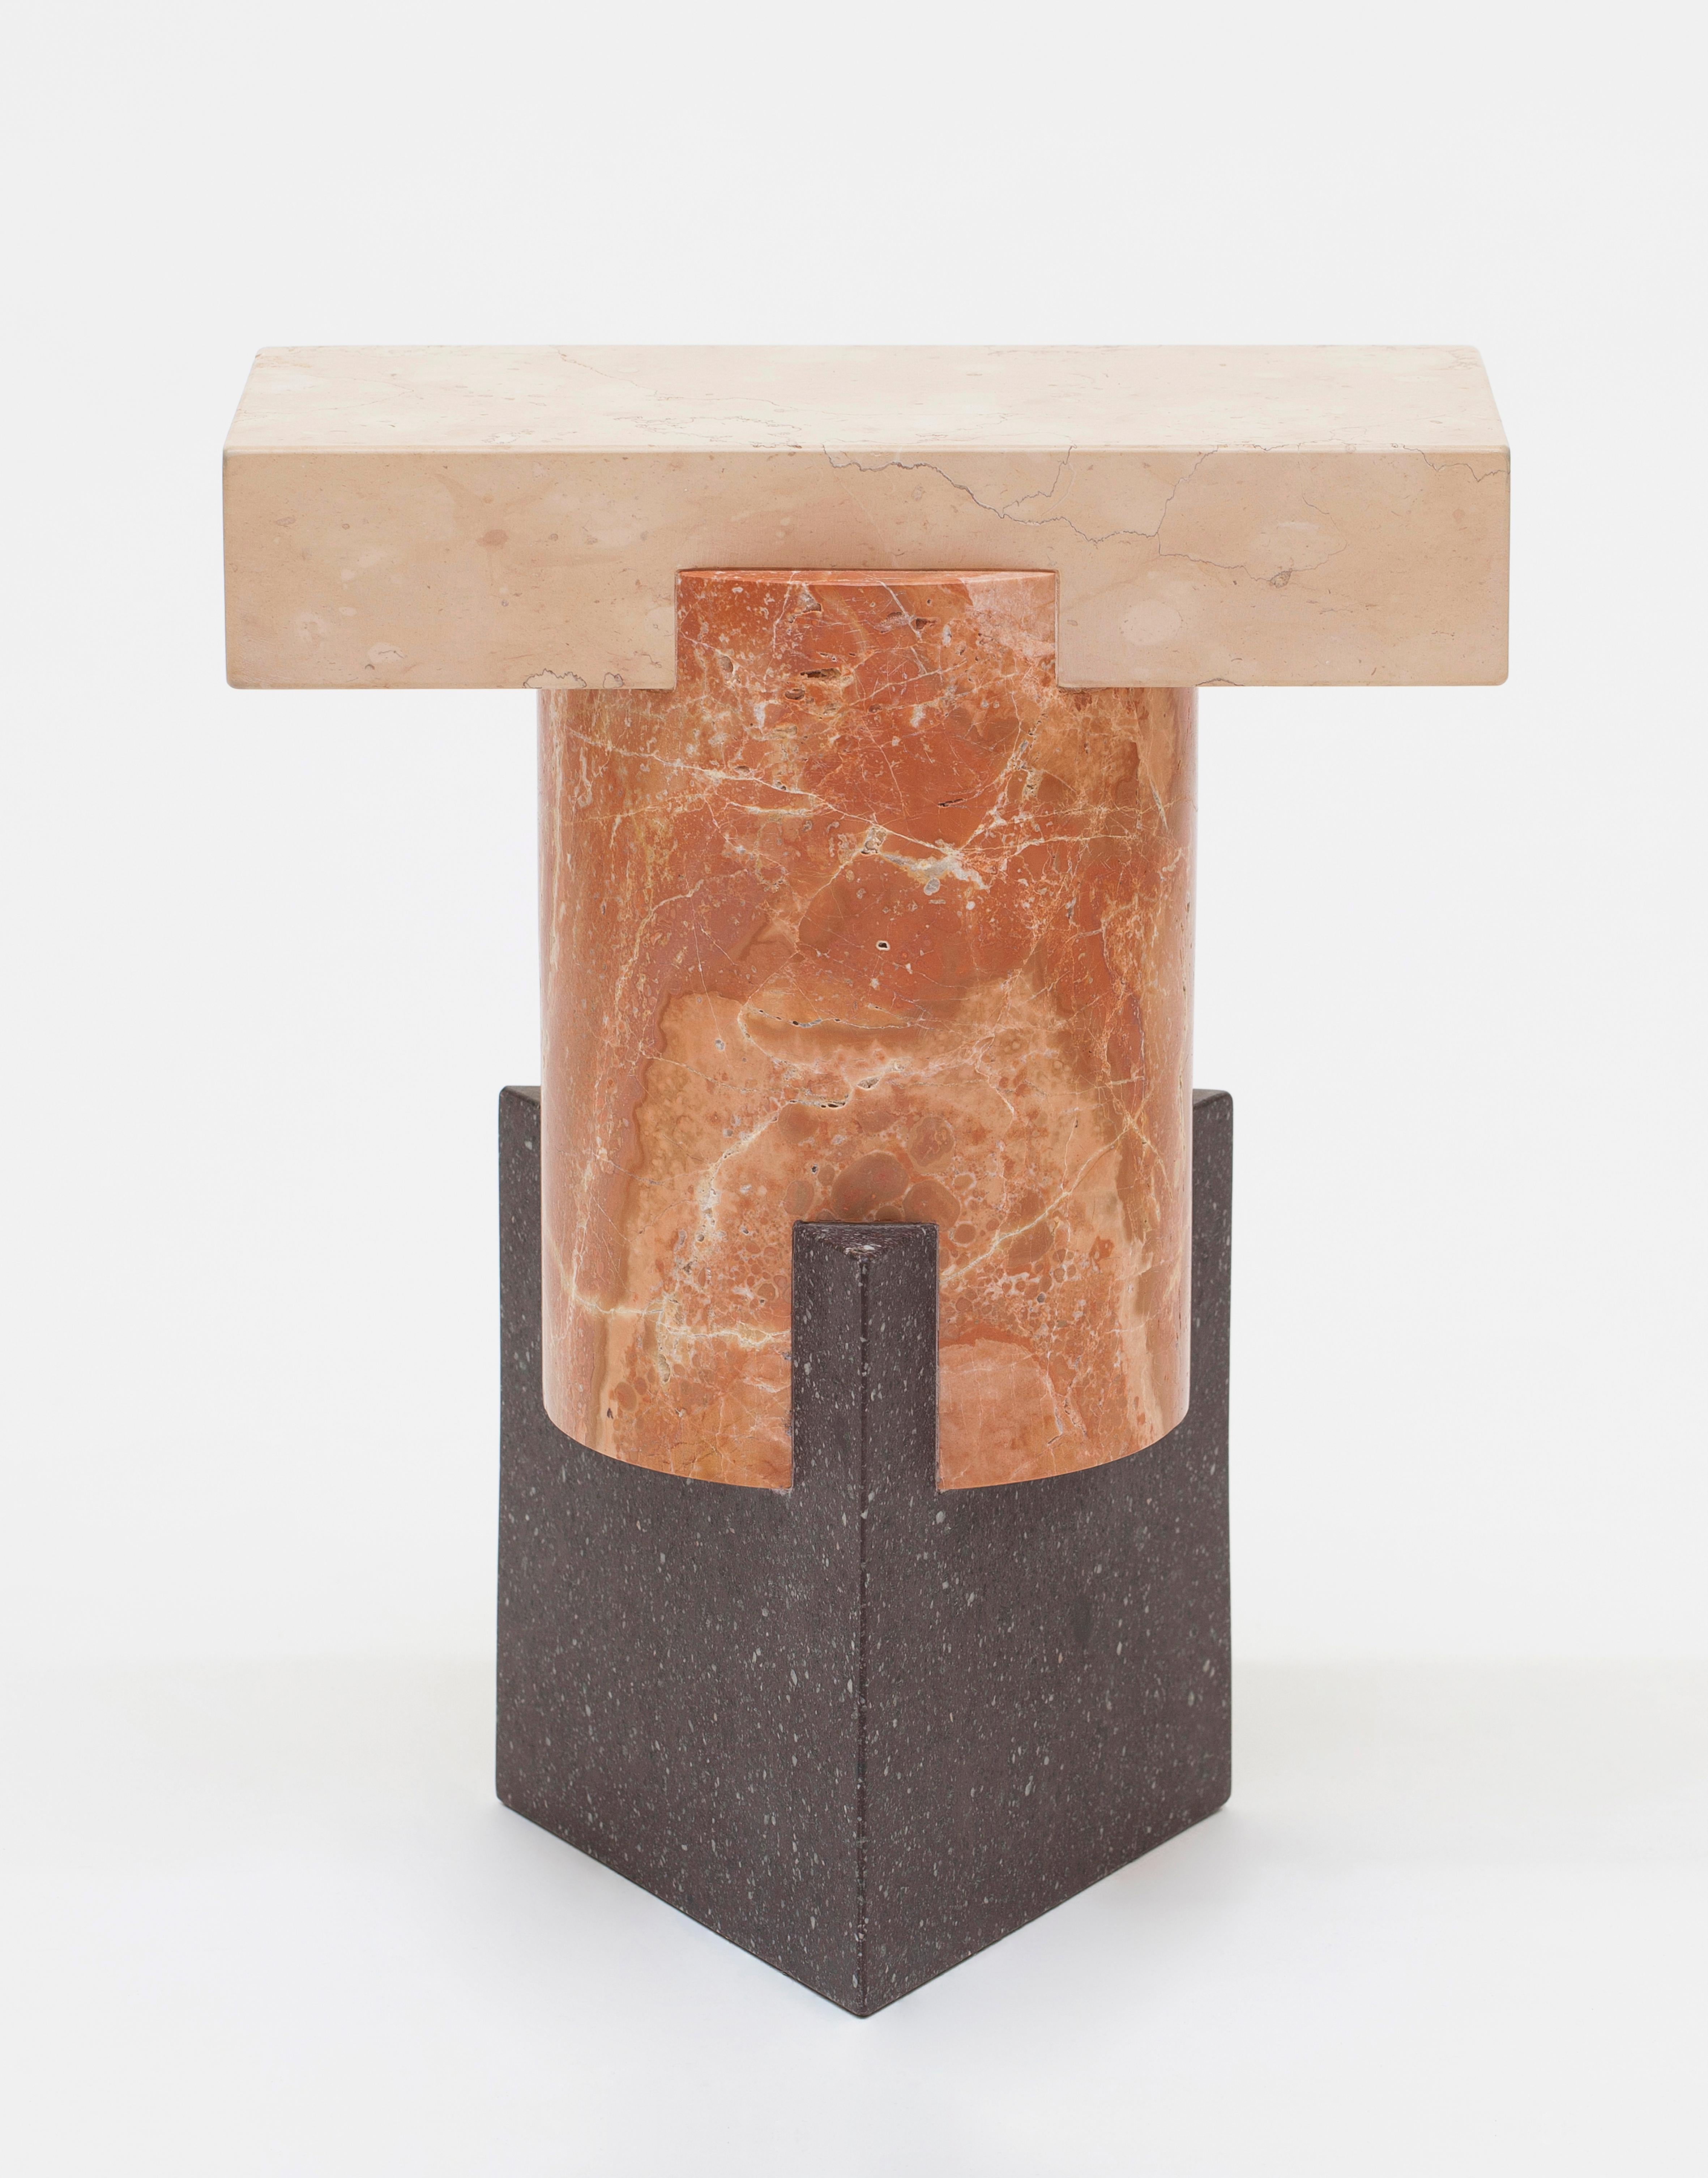 Marble Tuskan chroma stool by Oeuffice
Edition: 12 + 2AP
2014
Dimensions: 34 x 21 x 42 cm
Materials: Rosa Perlino marble, Rosso Alicante marble, Porfido Red marble

Kapital is a series of limited edition tables and stools based on essential